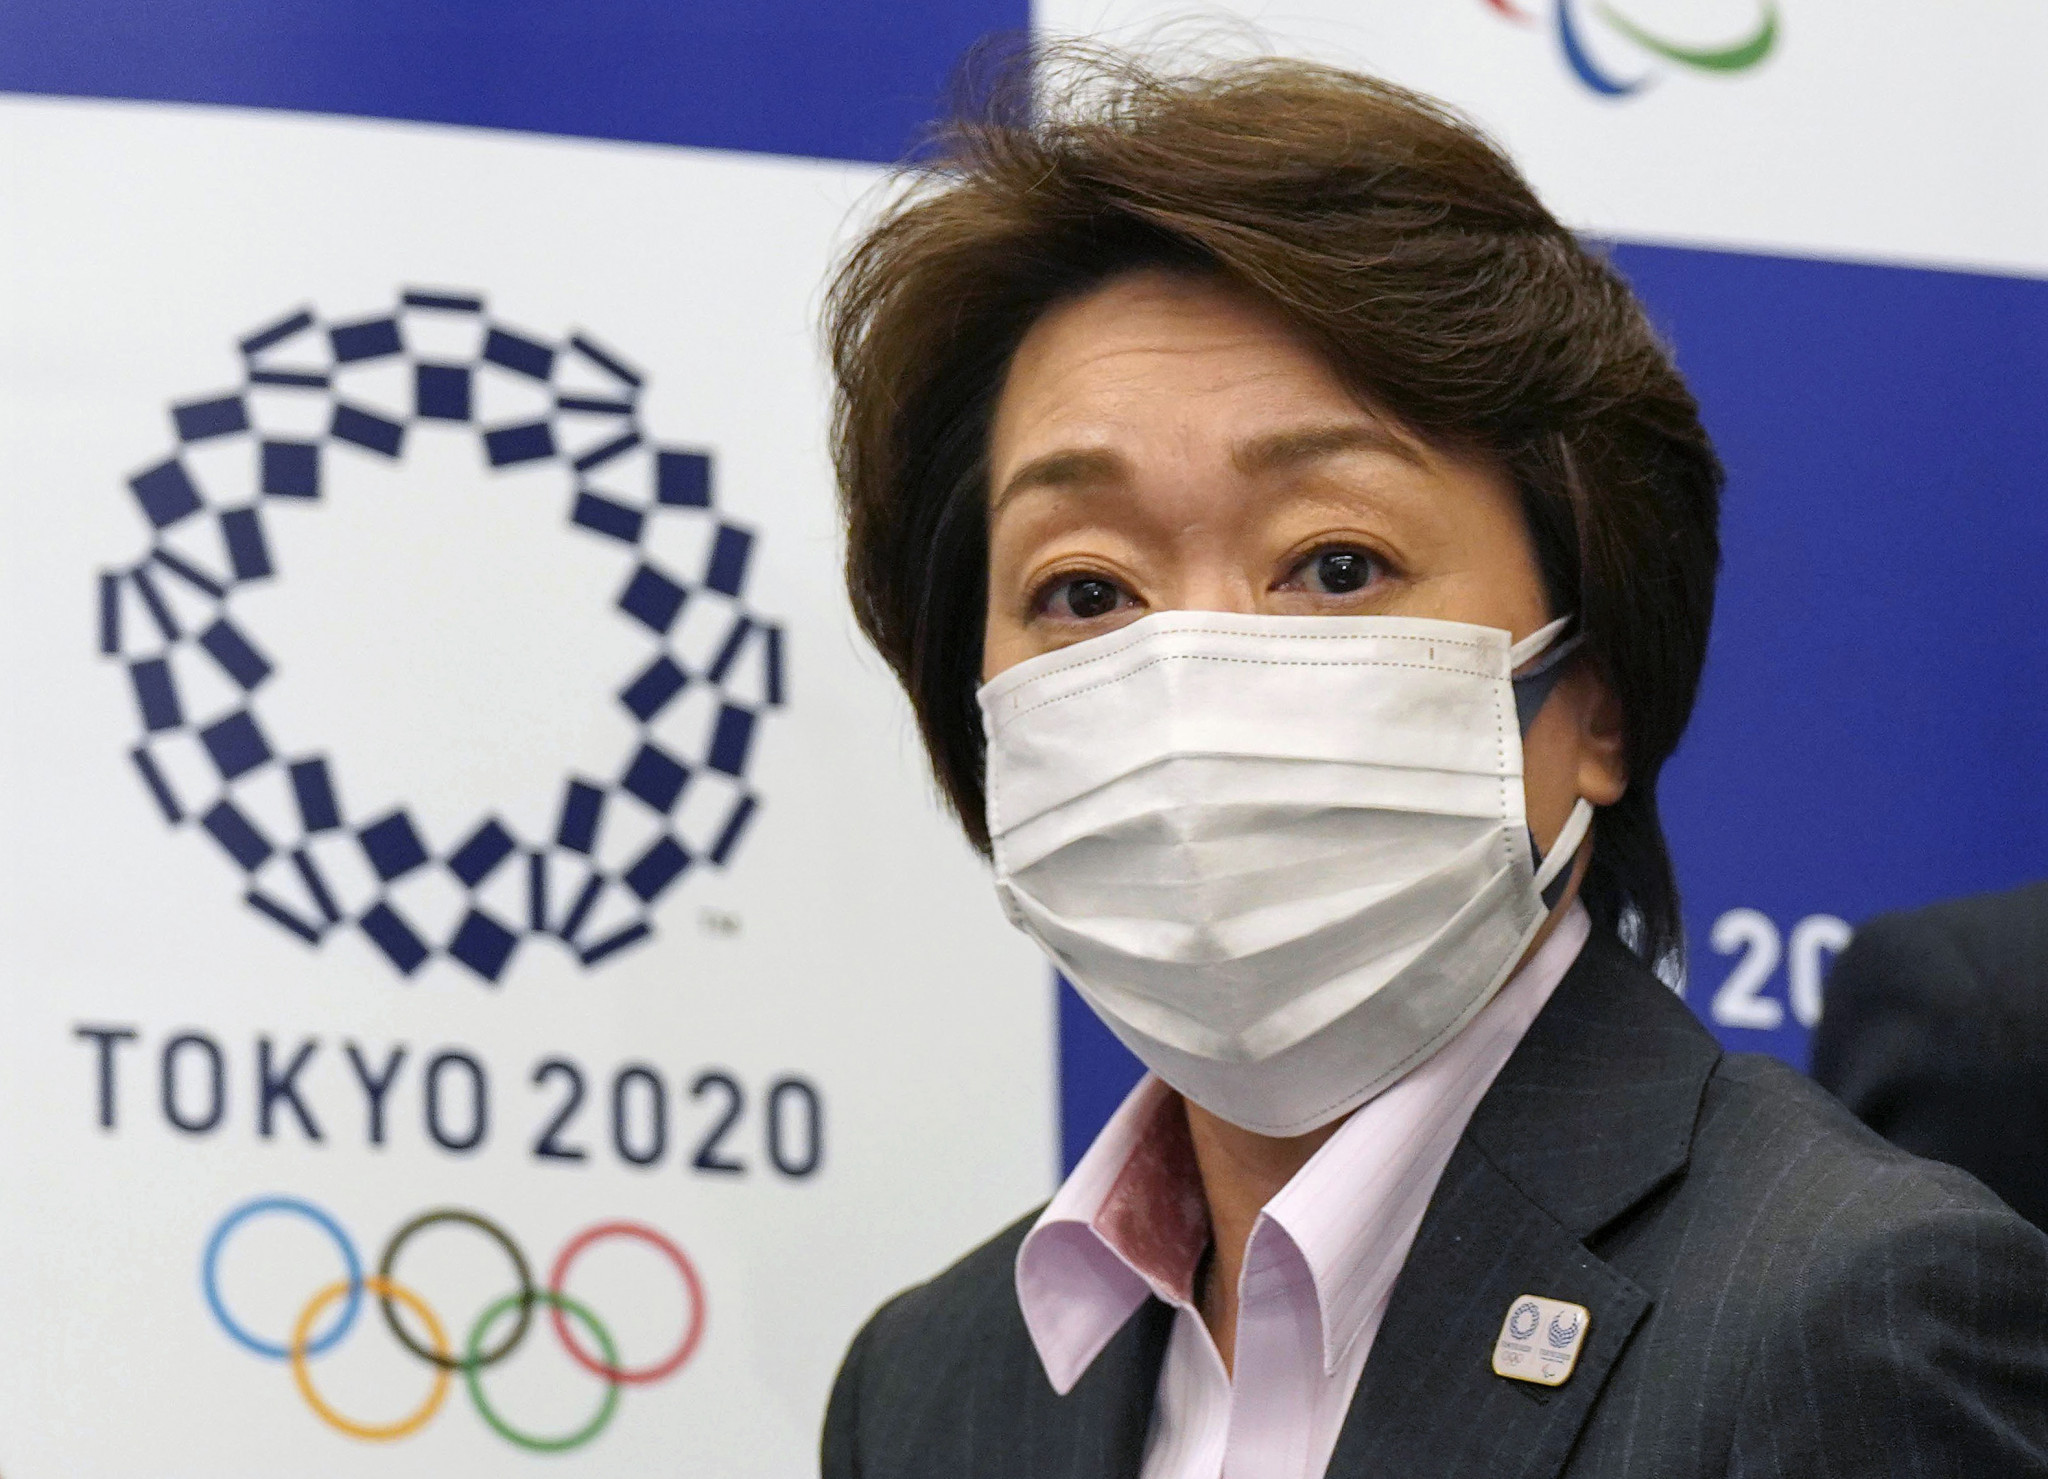 Tokyo 2020 President Seiko Hashimoto said she was "100 per cent" certain the Olympics would open next month ©Getty Images